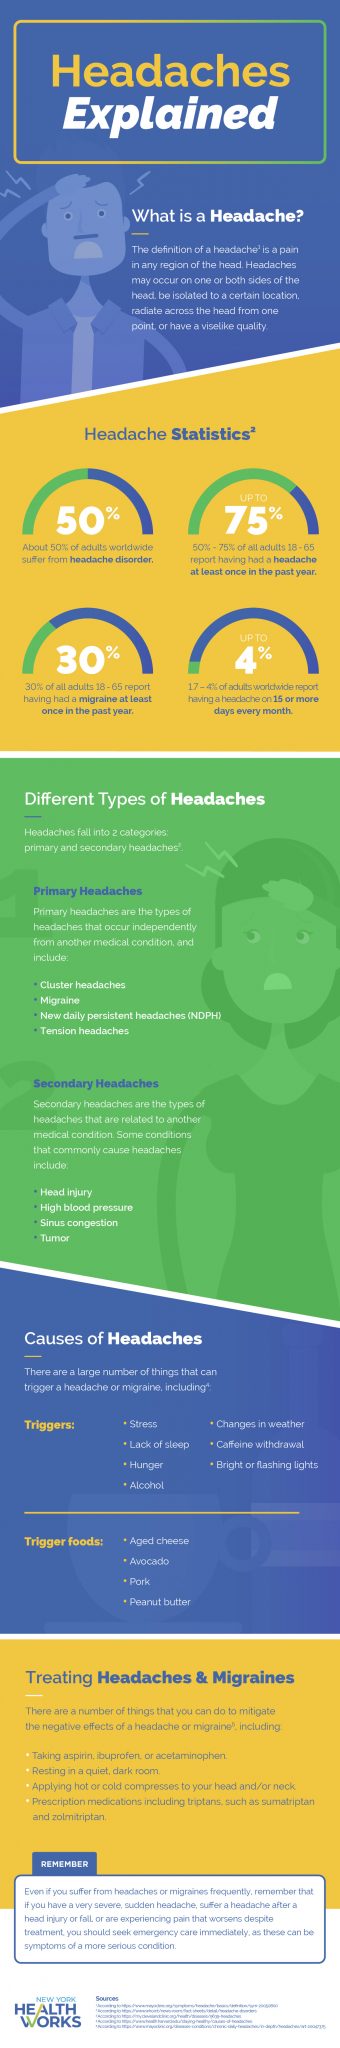 NYHW SOW101402 Infographic Headaches 03 340x2048 